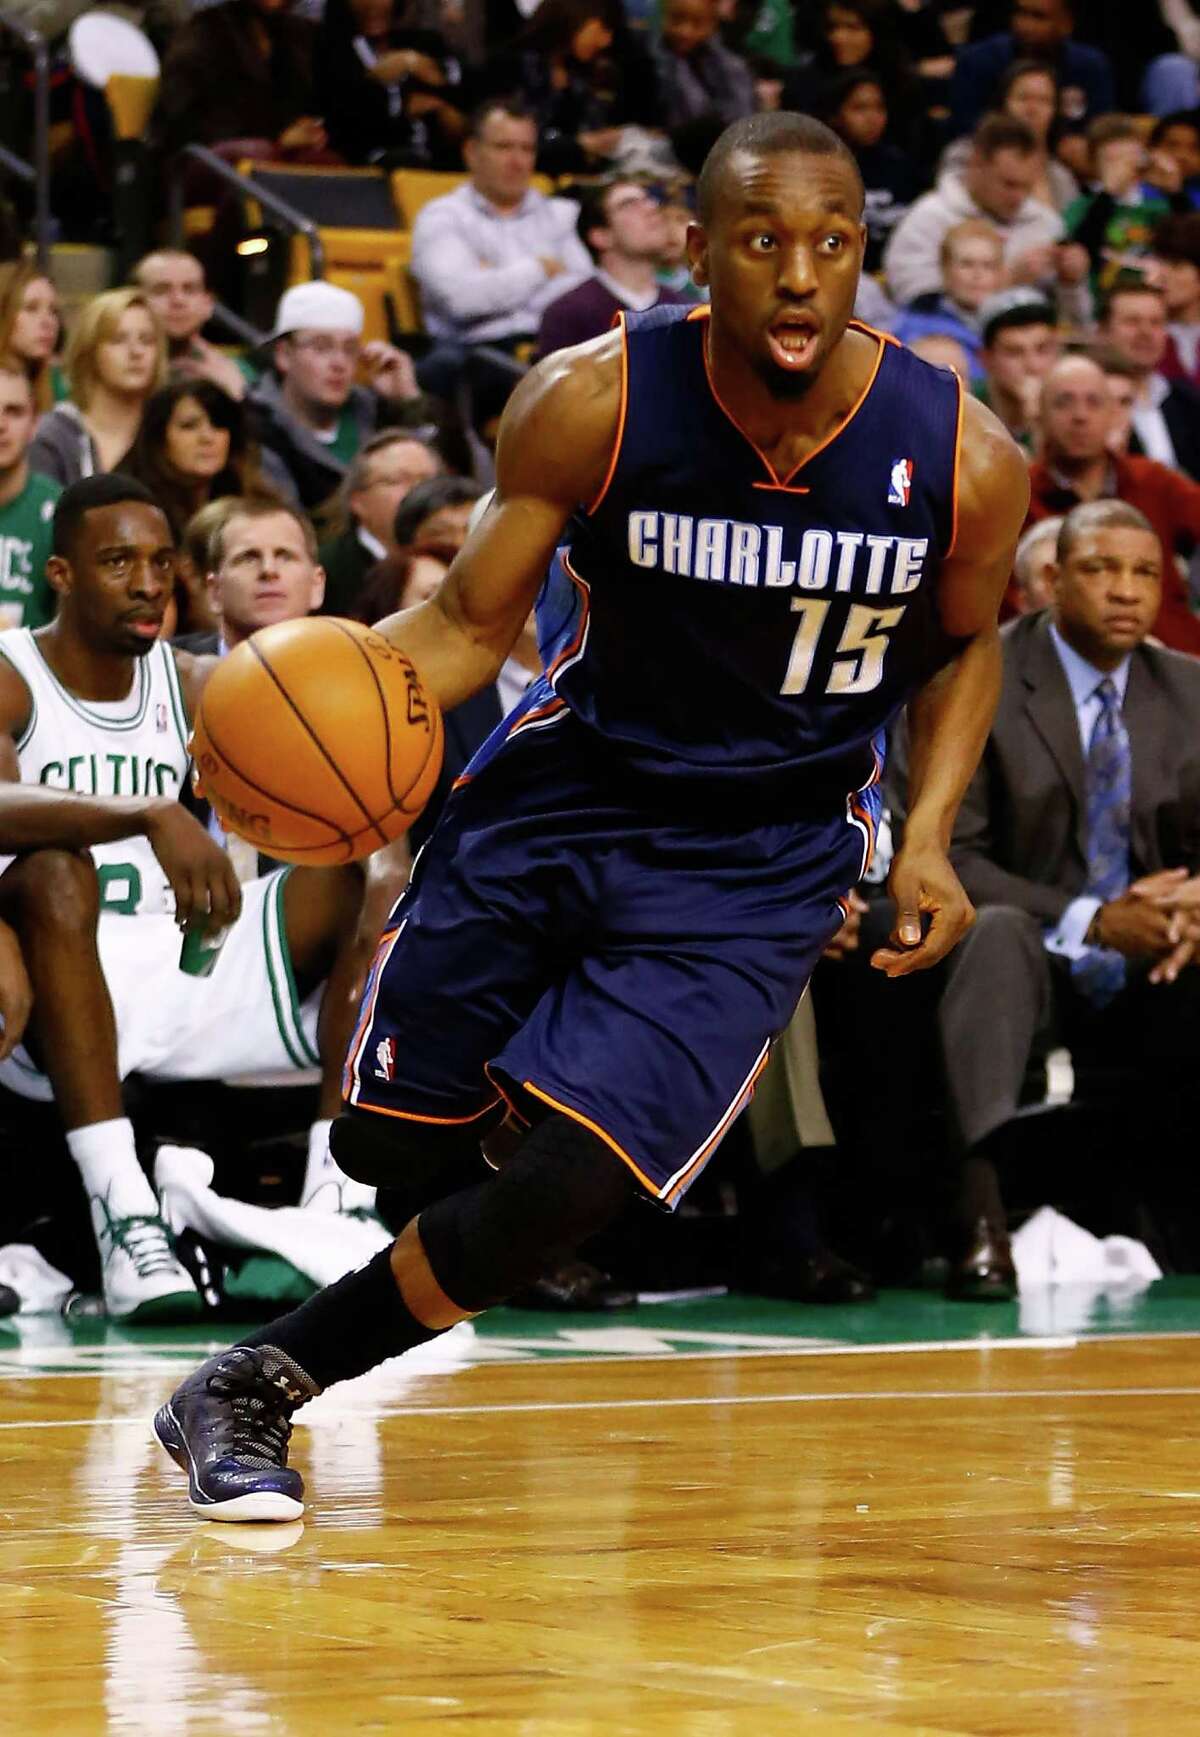 BOSTON, MA - JANUARY 14: Kemba Walker #15 of the Charlotte Bobcats drives to the basket against the Boston Celtics during the game on January 14, 2013 at TD Garden in Boston, Massachusetts. NOTE TO USER: User expressly acknowledges and agrees that, by downloading and or using this photograph, User is consenting to the terms and conditions of the Getty Images License Agreement. (Photo by Jared Wickerham/Getty Images)